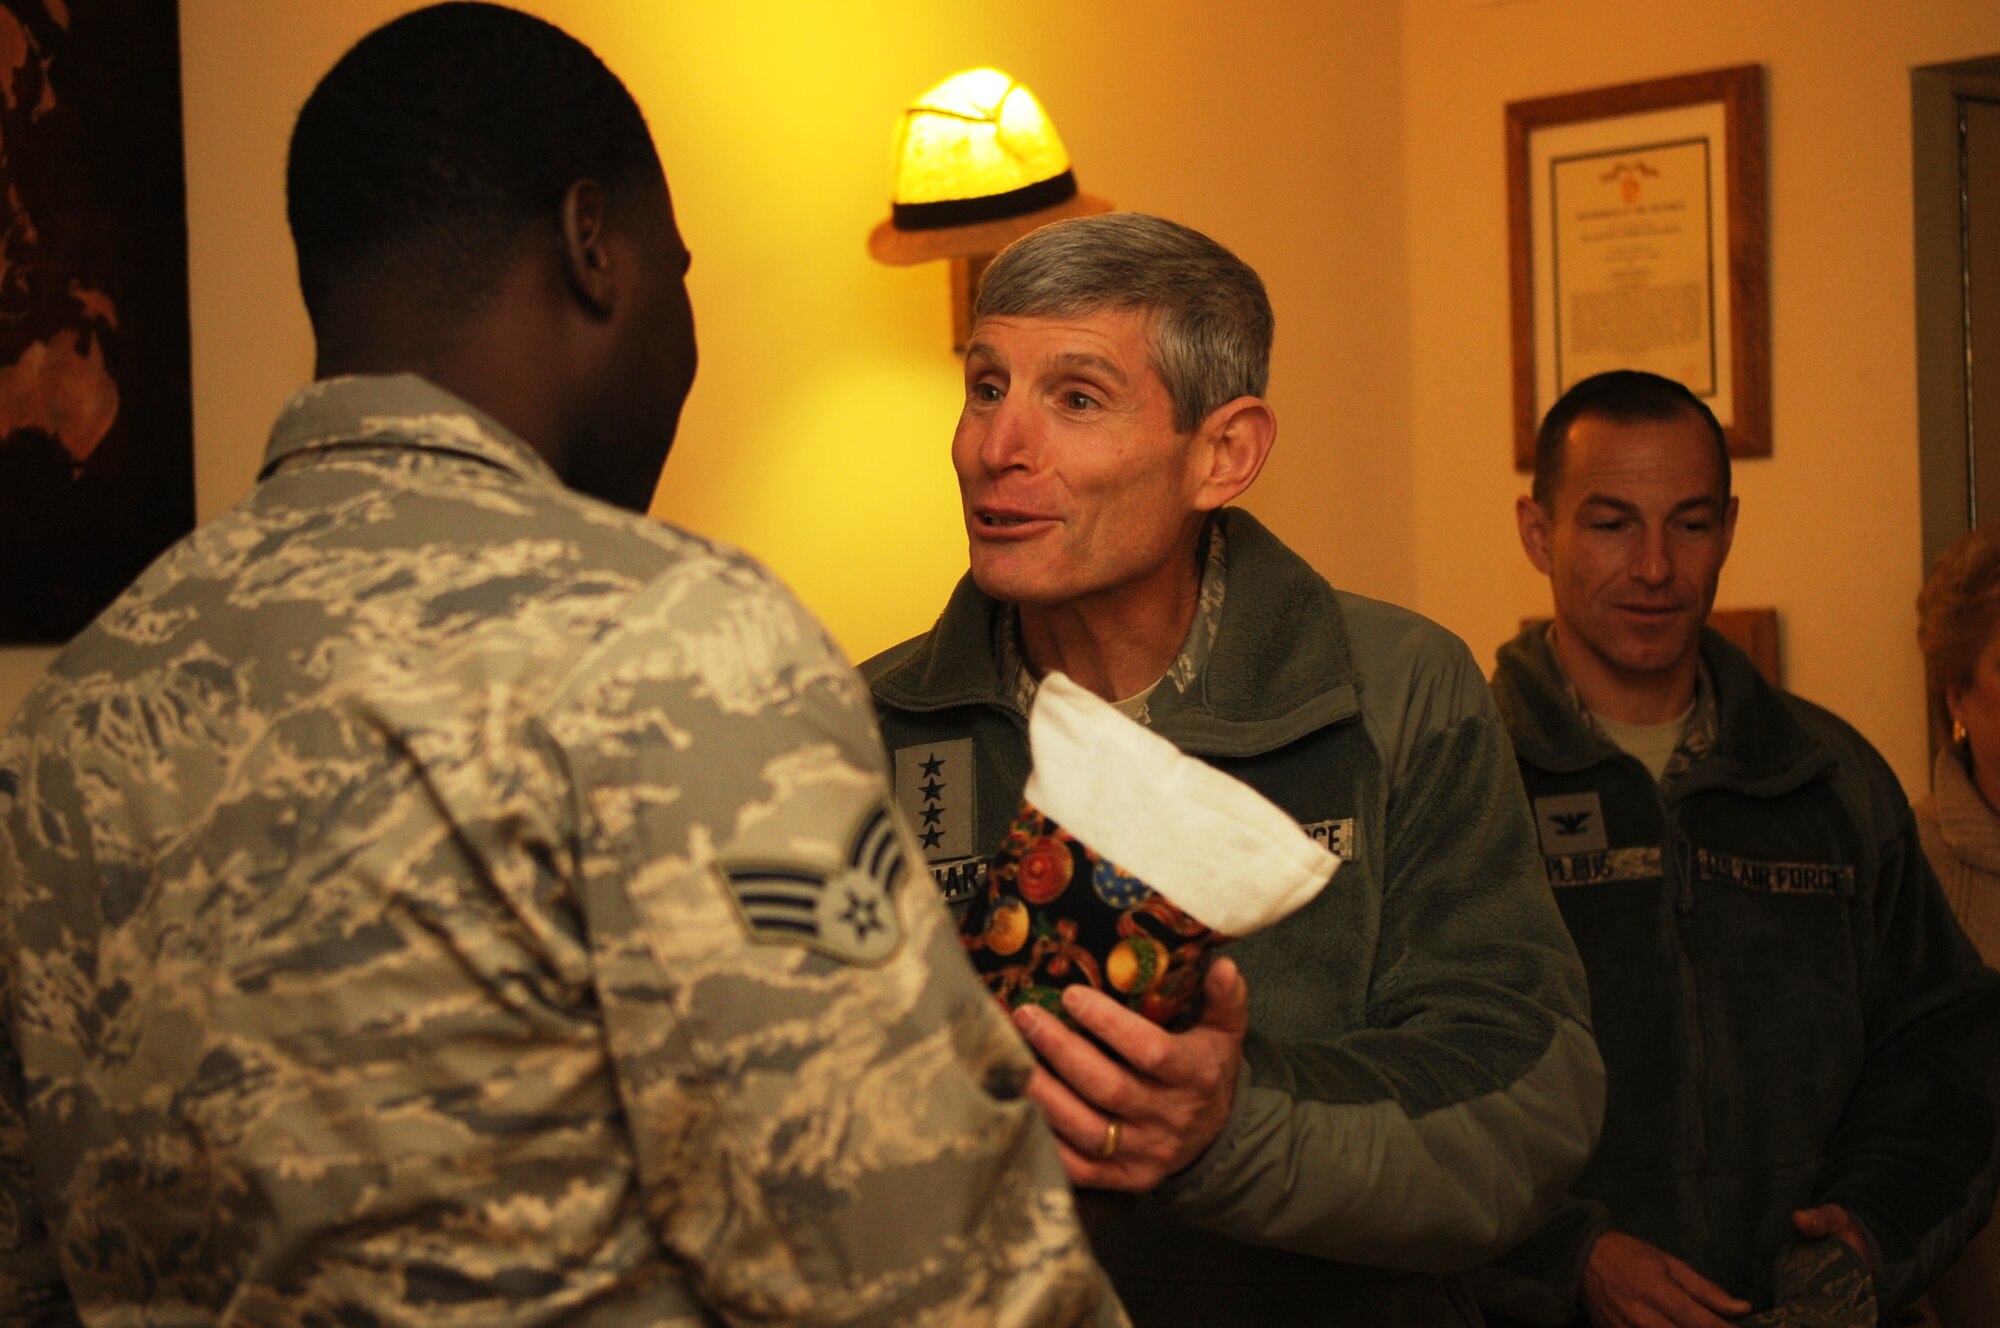 Air Force Chief of Staff Gen. Norton Schwartz presents a holiday stocking to Senior Airman Jeremy Roberts, 8th Logistics Readiness Squadron, Dec. 24, 2011 at Kunsan Air Base, Republic of Korea. The general visited the dorms at Kunsan to see first-hand the quality of life and living conditions for Airmen stationed at Kunsan. (U.S. Air Force photo by Master Sgt. Sonny Cohrs/Released)